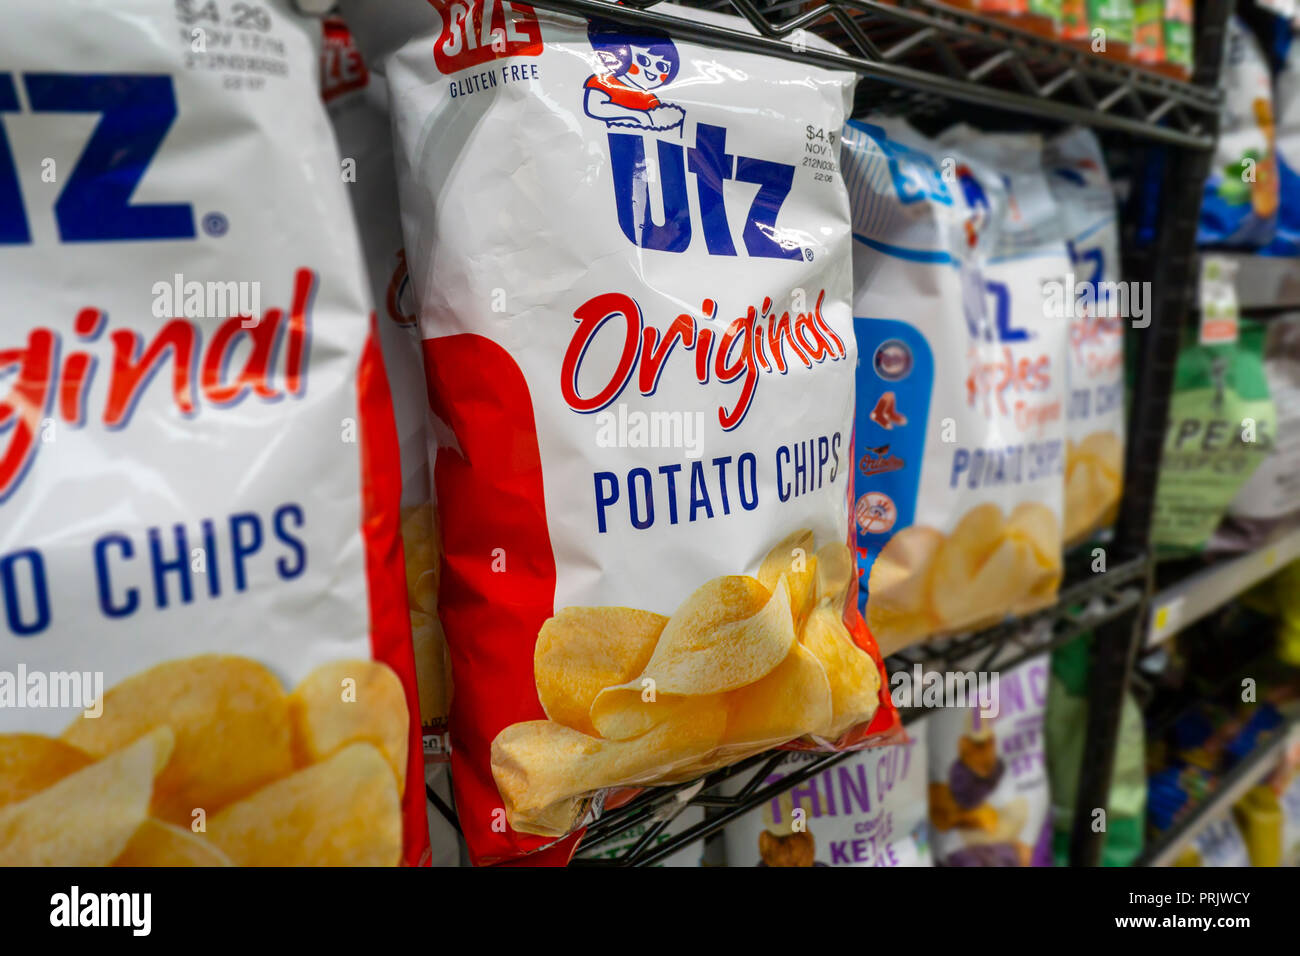 A display of Utz brand potato chips are seen in a supermarket in New York on Wednesday, September 26, 2018.  (© Richard B. Levine) Stock Photo